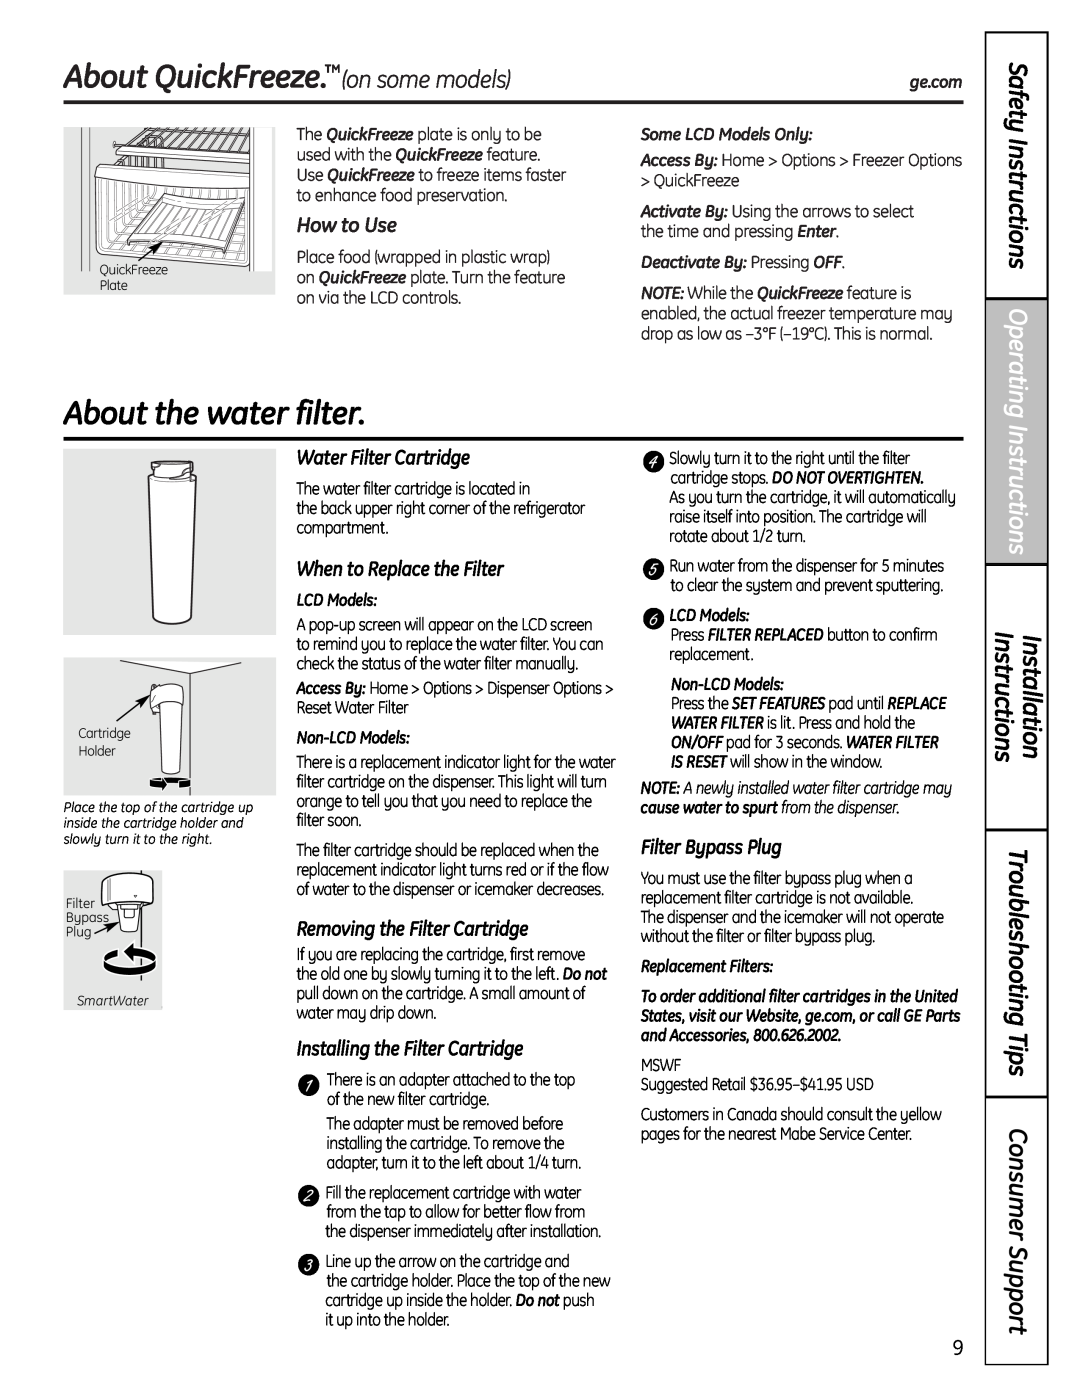 GE 25, 26 About QuickFreeze.on some models, About the water filter, Instructions Operating, Safety, Water Filter Cartridge 